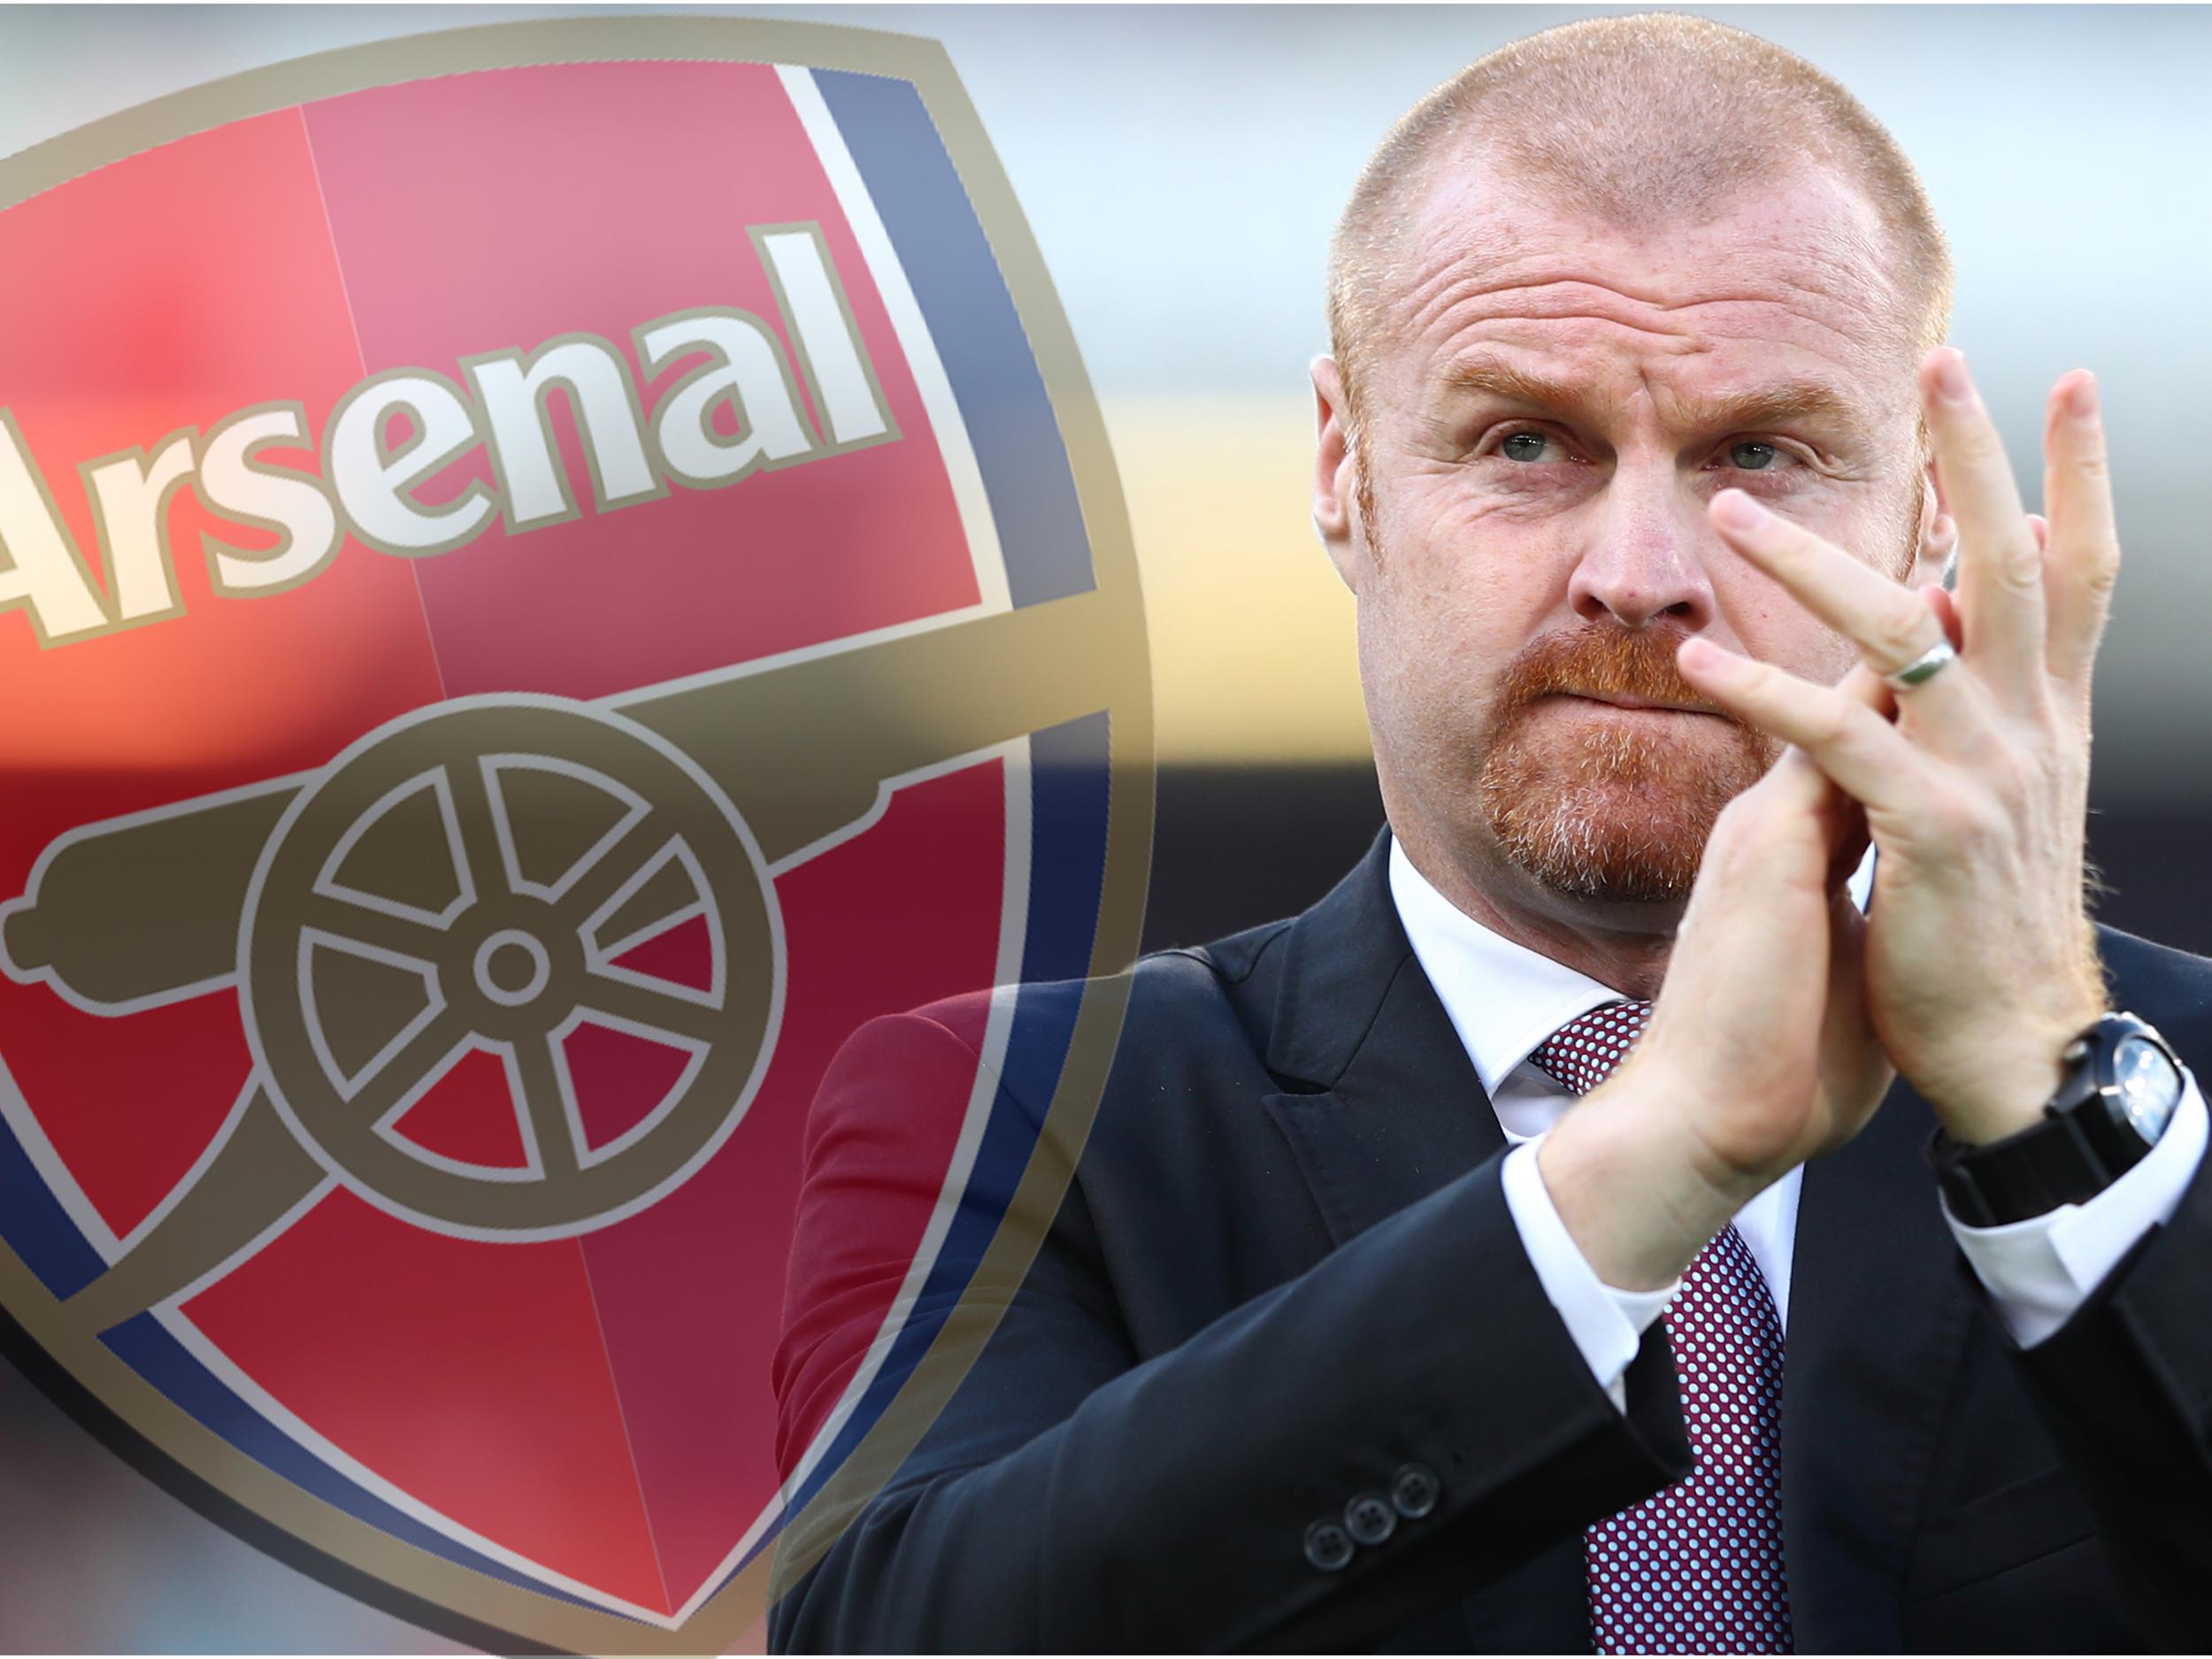 Dyche finds it hard to believe Arsenal will turn towards a British coach